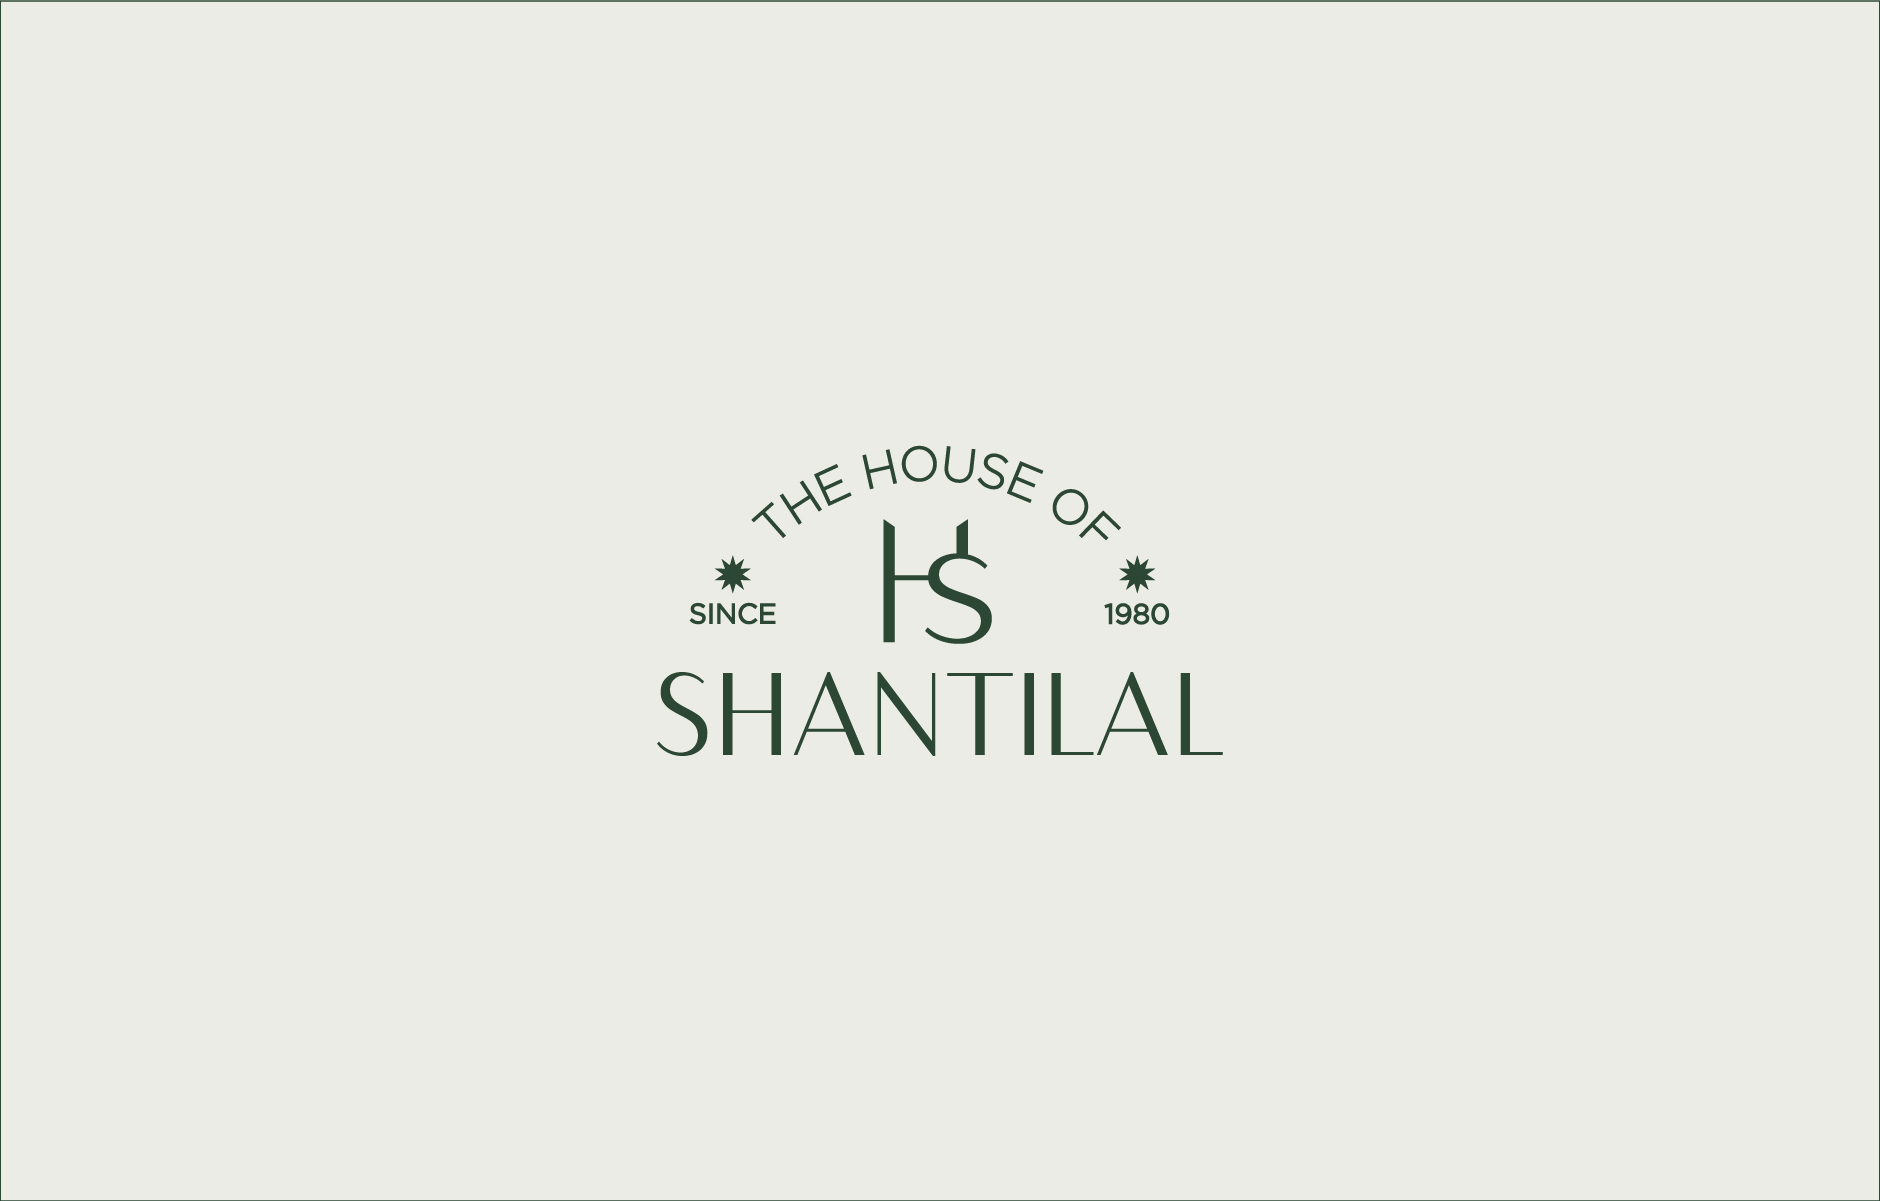 The House of Shantilal